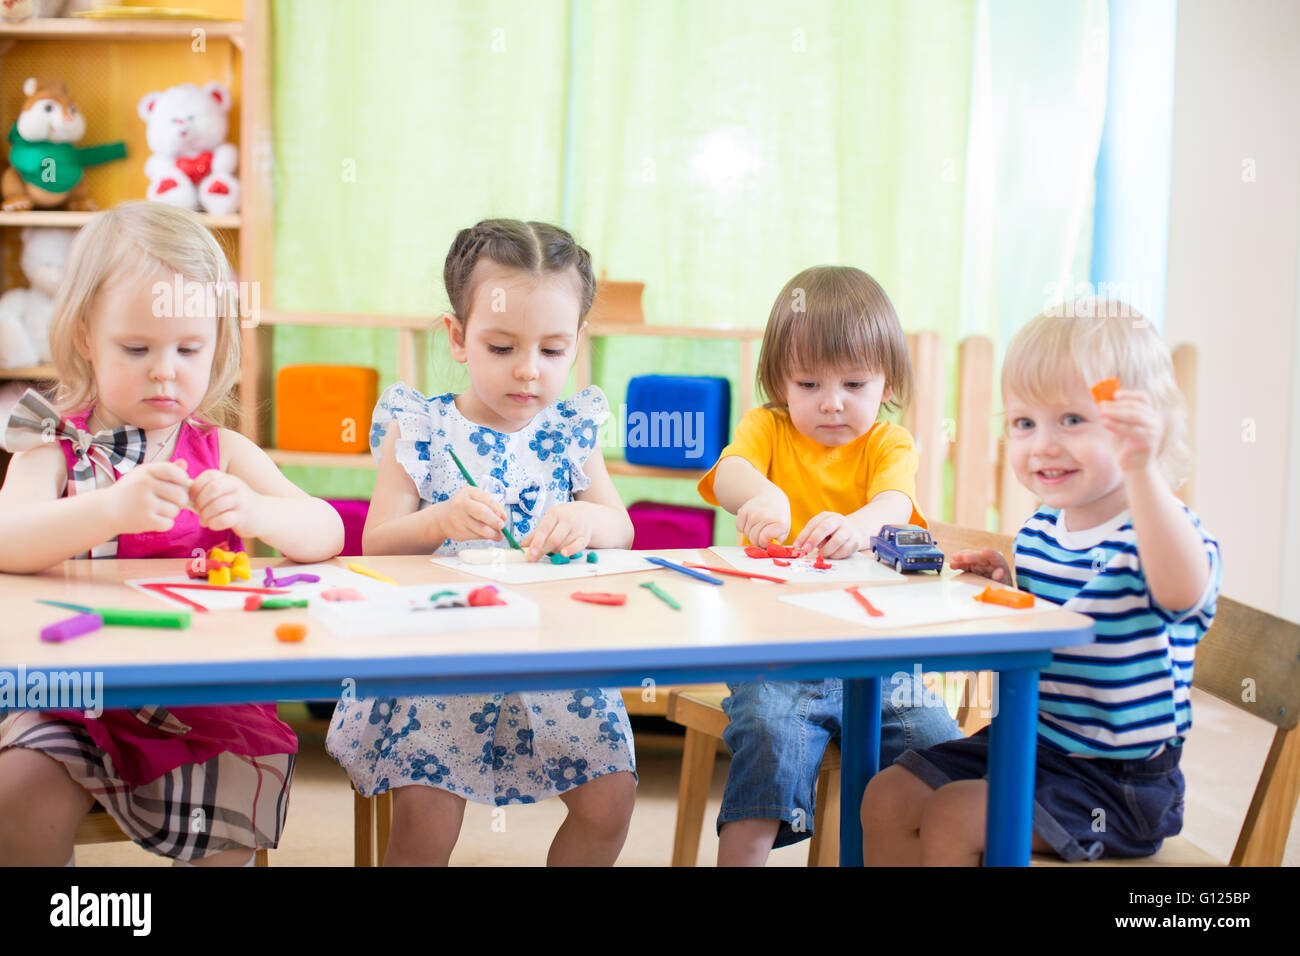 kids group learning with interest arts and crafts in day care centre playroom Stock Photo